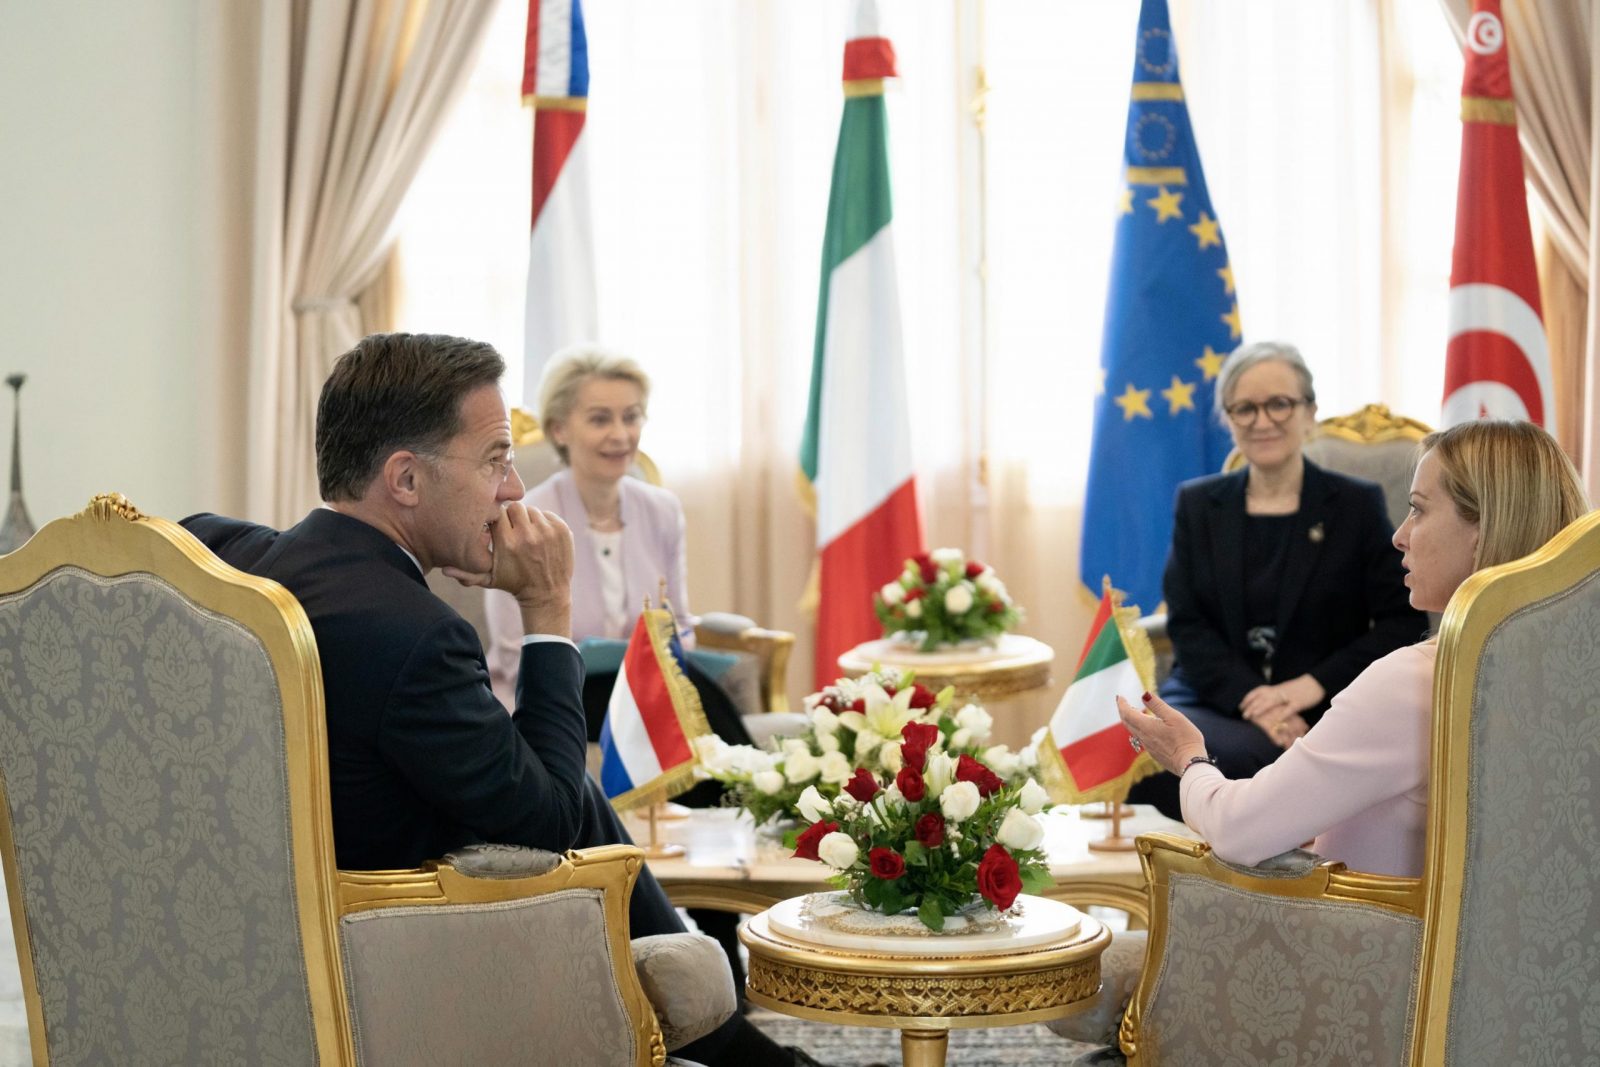 epa10684817 A handout picture made available by the Chigi Palace (Palazzo Chigi) Press Office shows (L-R clockwise) Netherlands' Prime Minister Mark Rutte, European Commission President Ursula von der Leyen, Tunisian Prime Minister Najla Bouden and Italy's Prime Minister Giorgia Meloni during a joint meeting in Carthage, outside Tunis, Tunisia, 11 June 2023. The EU leaders are visiting Tunisia, where they are expected to hold talks with the Tunisian president.  EPA/FILIPPO ATTILI/CHIGI PALACE PRESS OFFICE HANDOUT  HANDOUT EDITORIAL USE ONLY/NO SALES